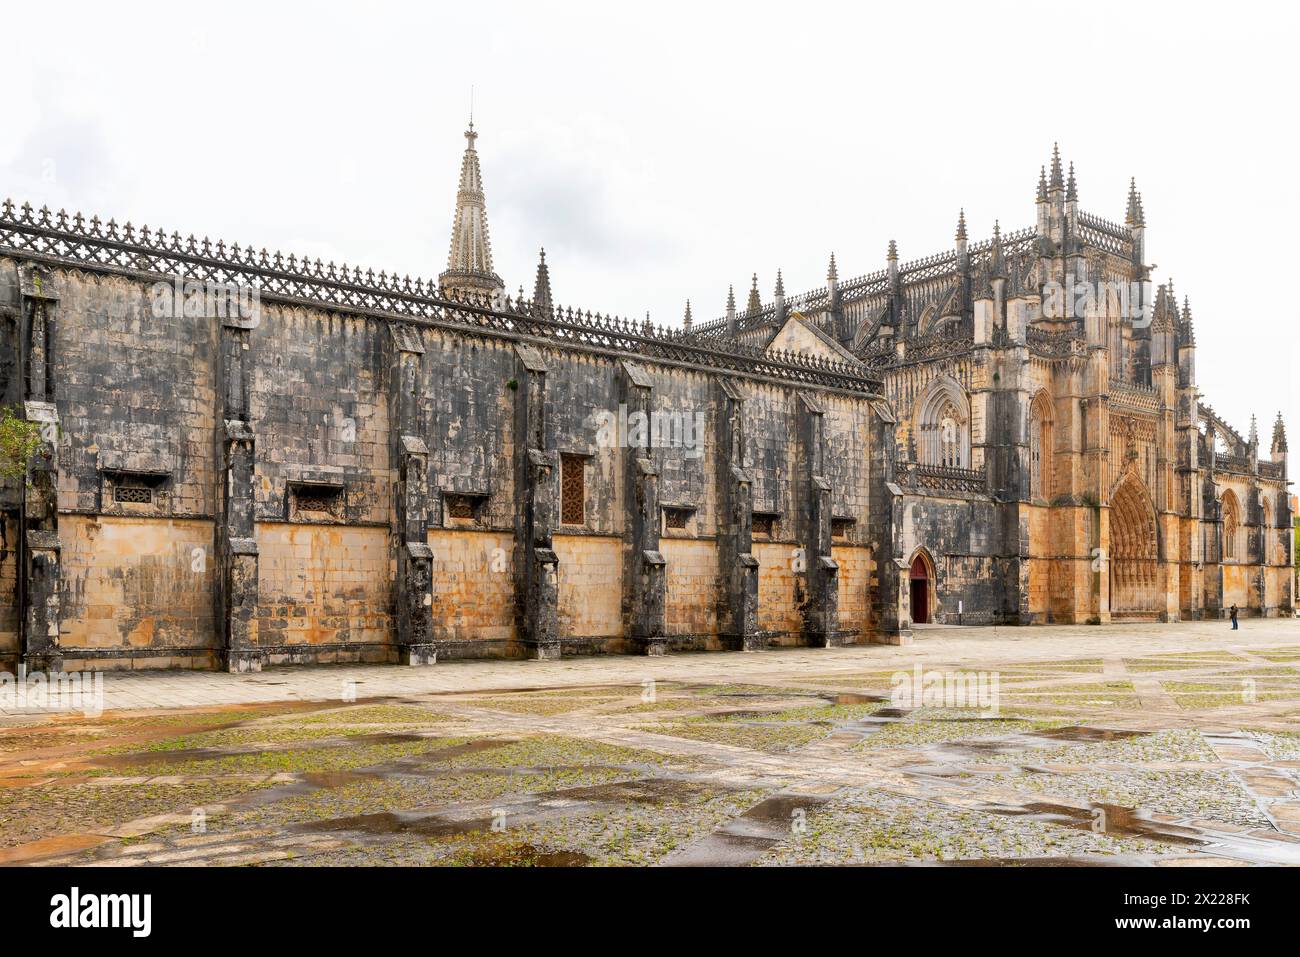 The main façade of the Dominican convent or Monastery of Batalha in the town of Batalha, Beira Litoral province, Portugal. Erected 1385 agter victory Stock Photo